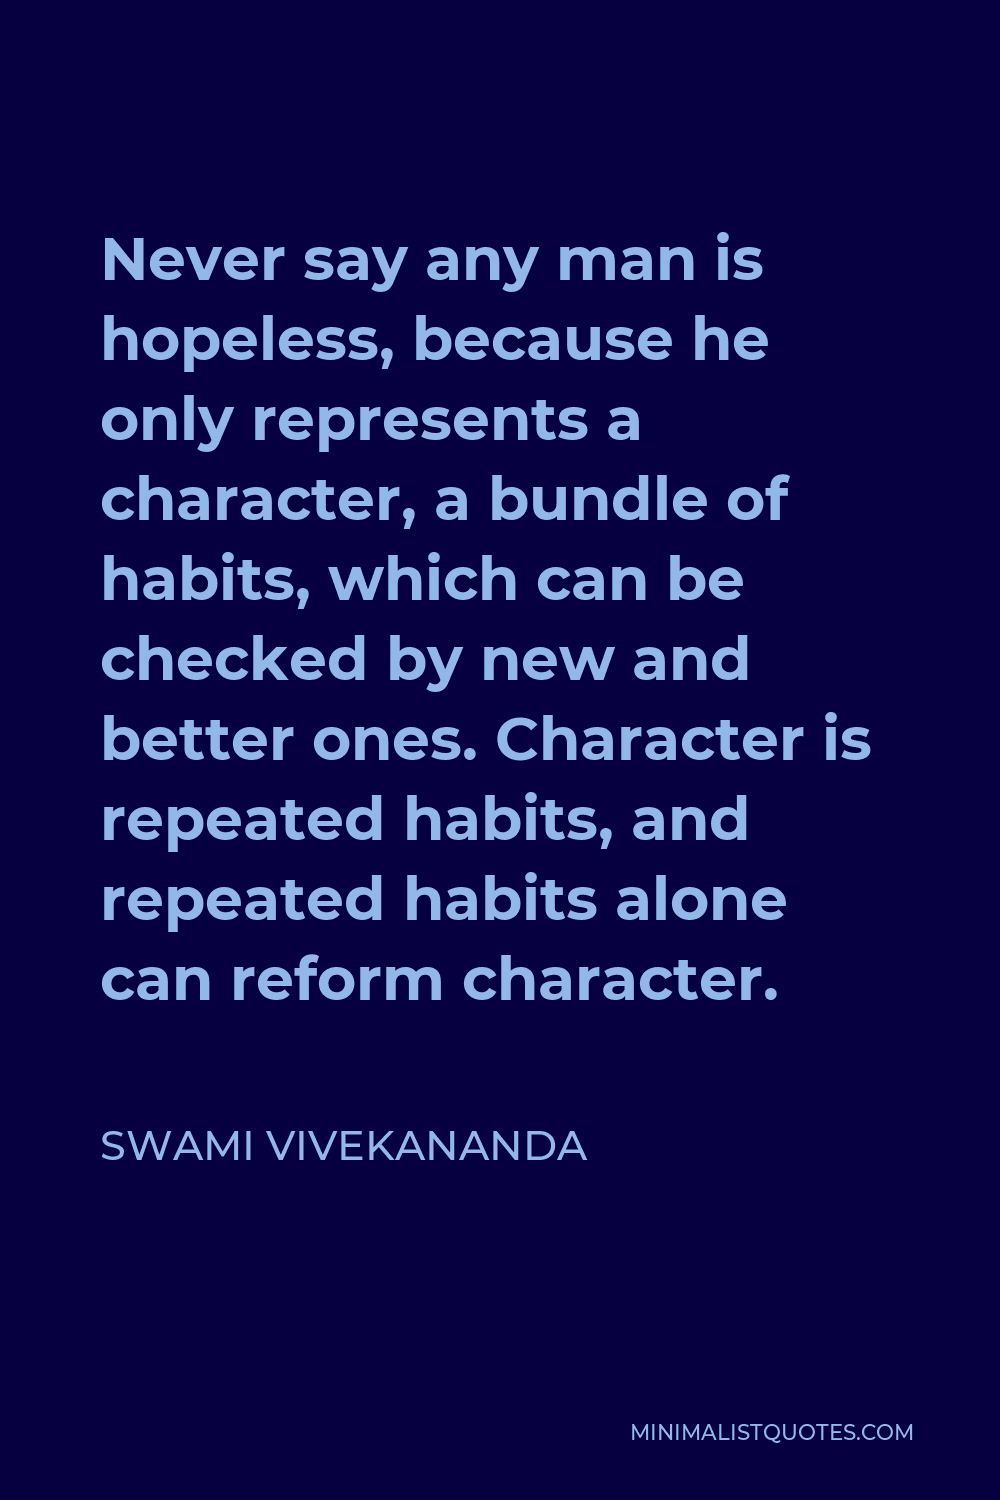 Swami Vivekananda Quote - Never say any man is hopeless, because he only represents a character, a bundle of habits, which can be checked by new and better ones. Character is repeated habits, and repeated habits alone can reform character.